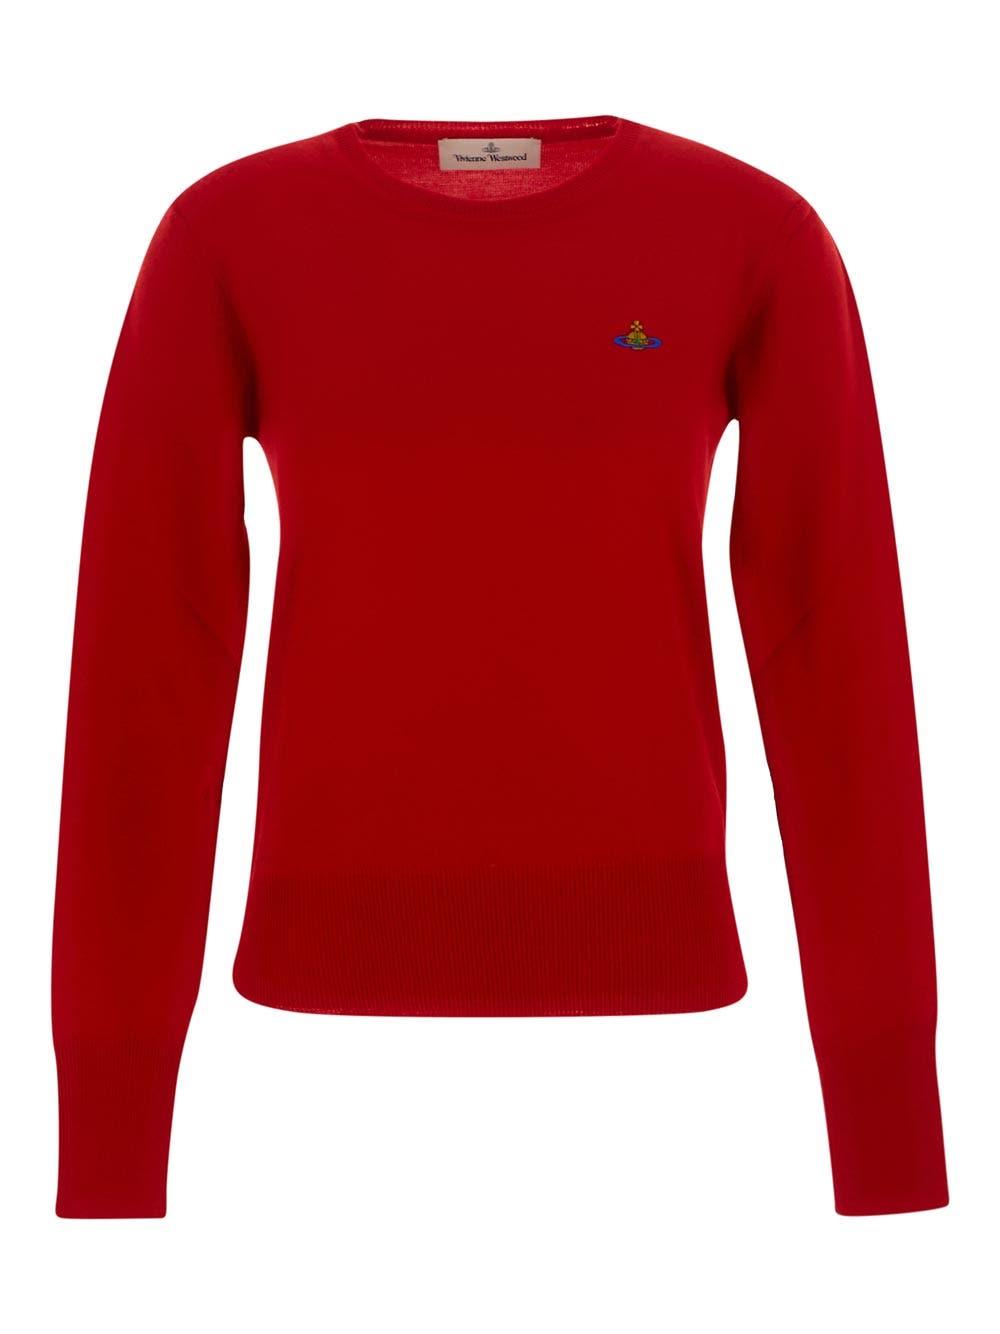 Vivienne Westwood Red Knitted Pullover